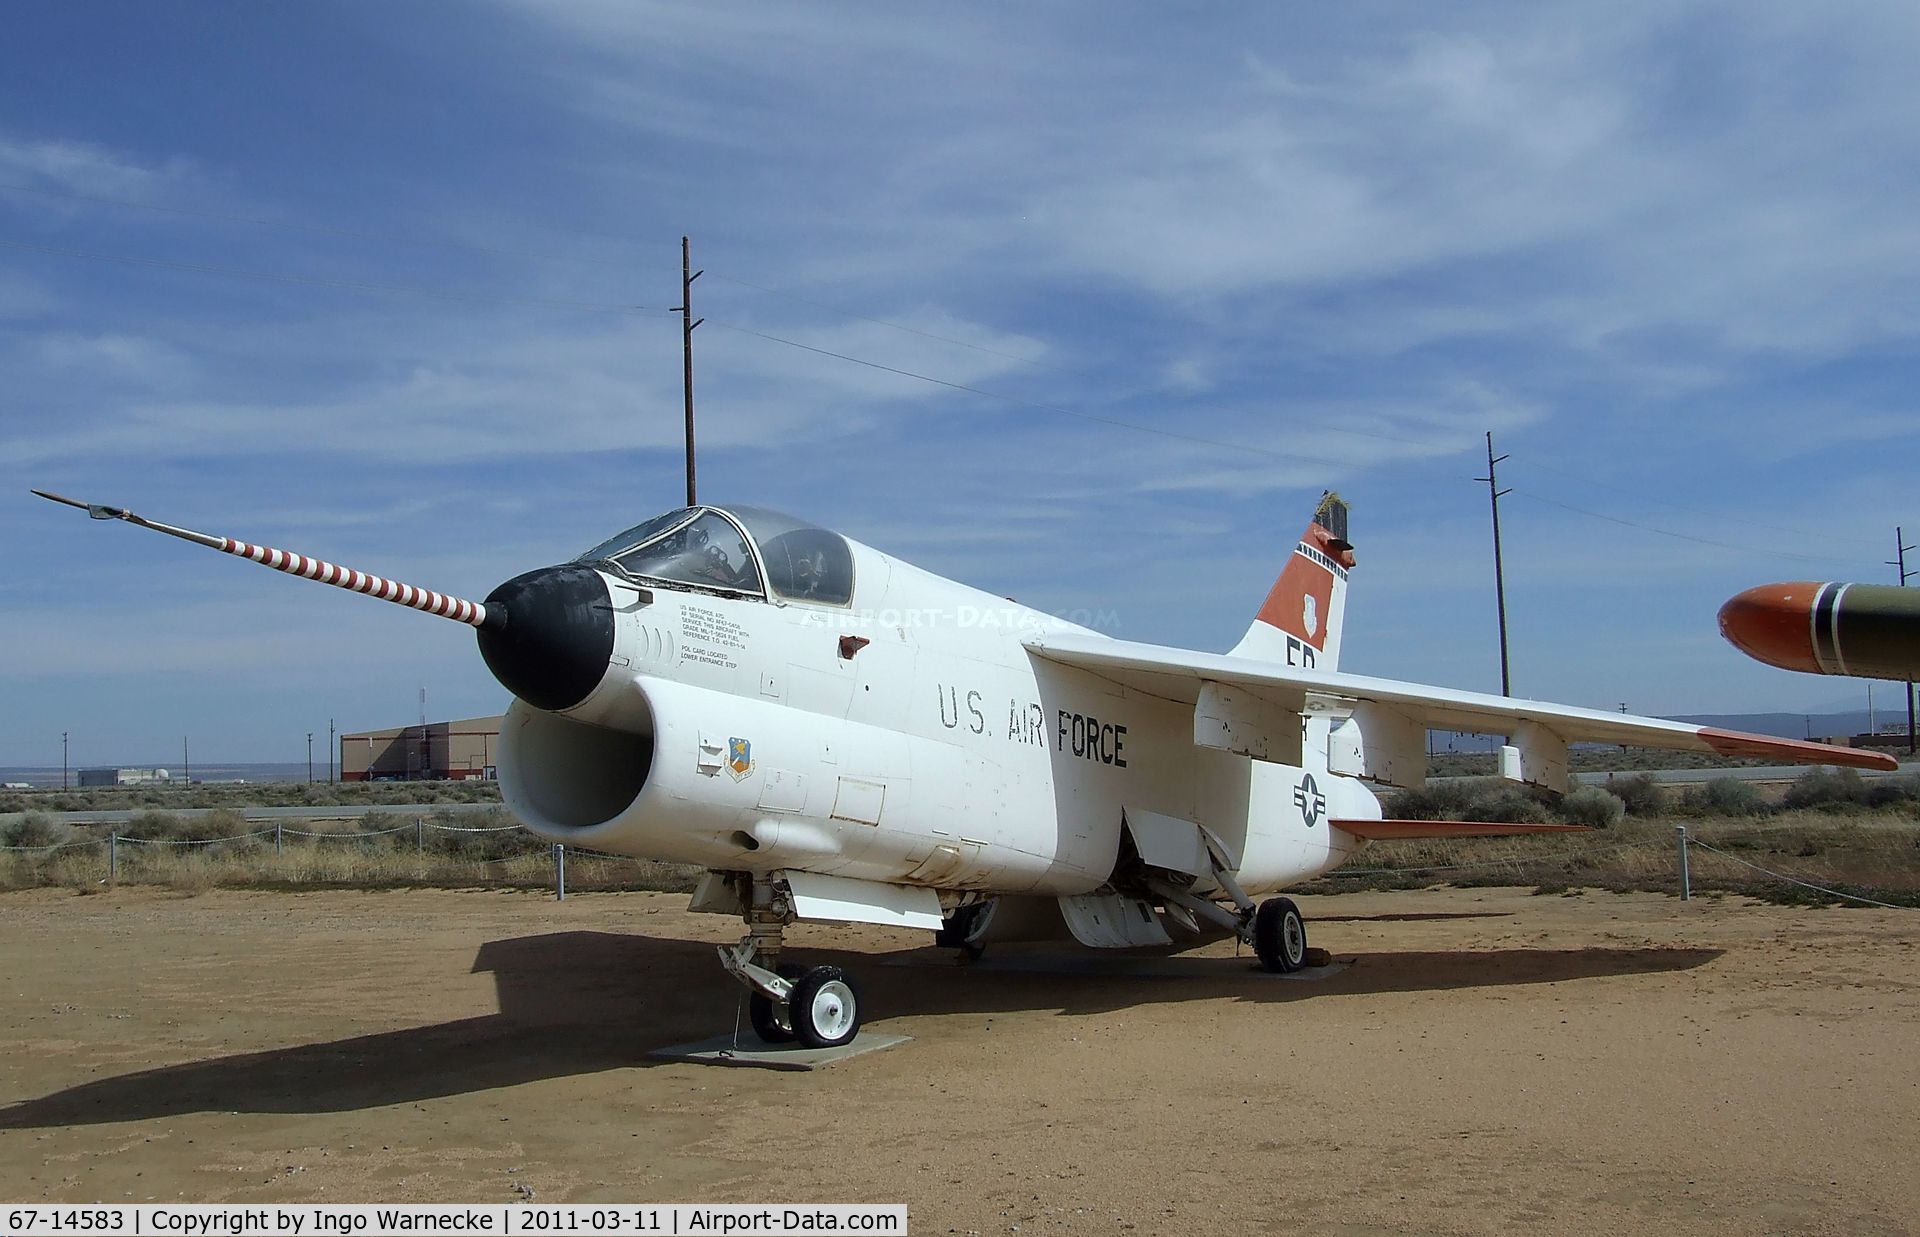 67-14583, LTV YA-7D Corsair II C/N D-002, LTV YA-7D Corsair II at the Air Force Flight Test Center Museum, Edwards AFB CA